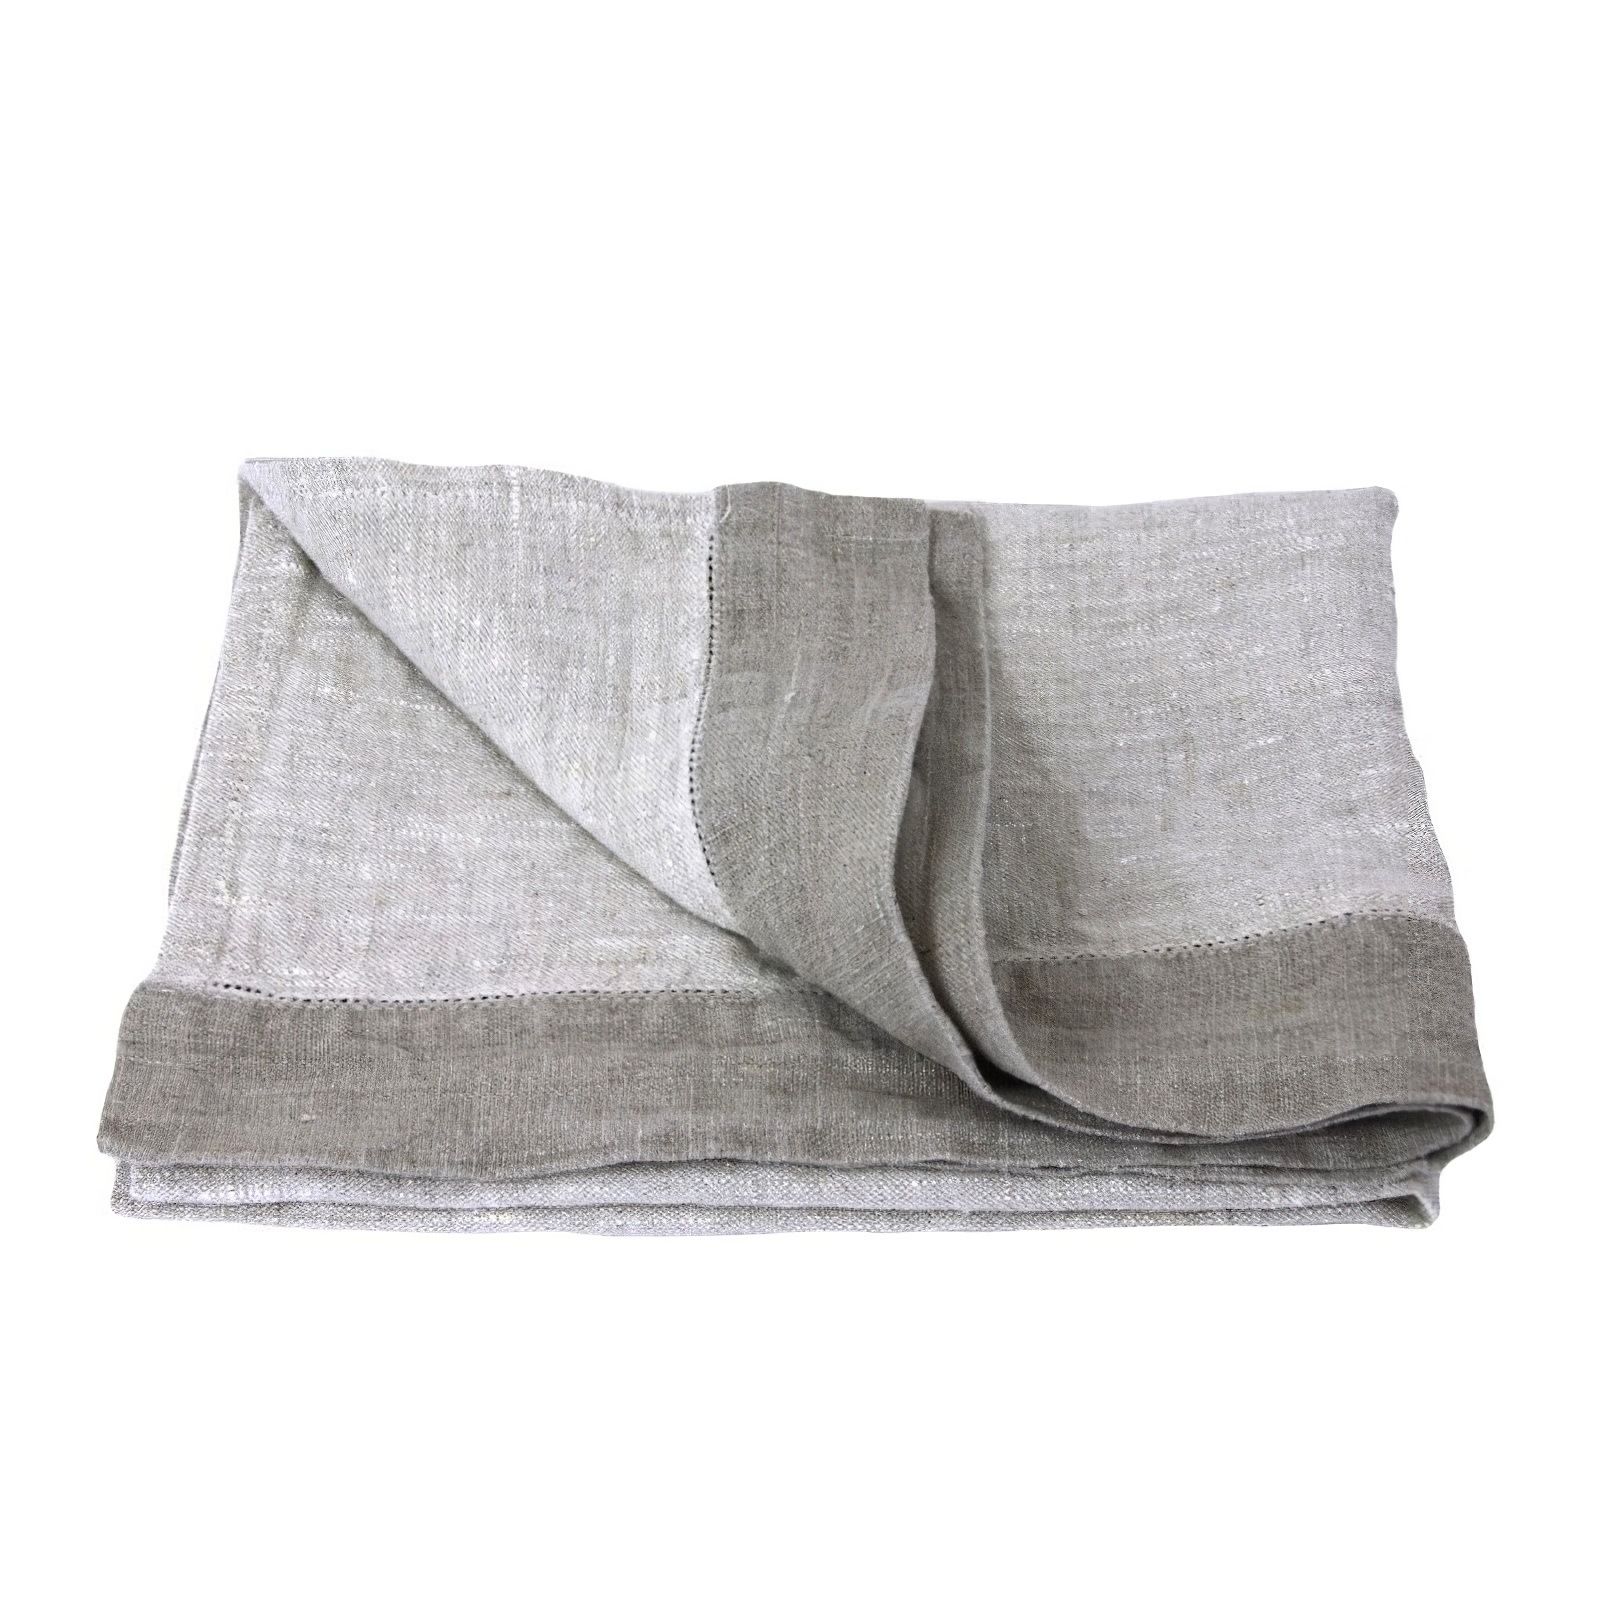 Striped linen towel / Durable towels / Rough stonewashed towels